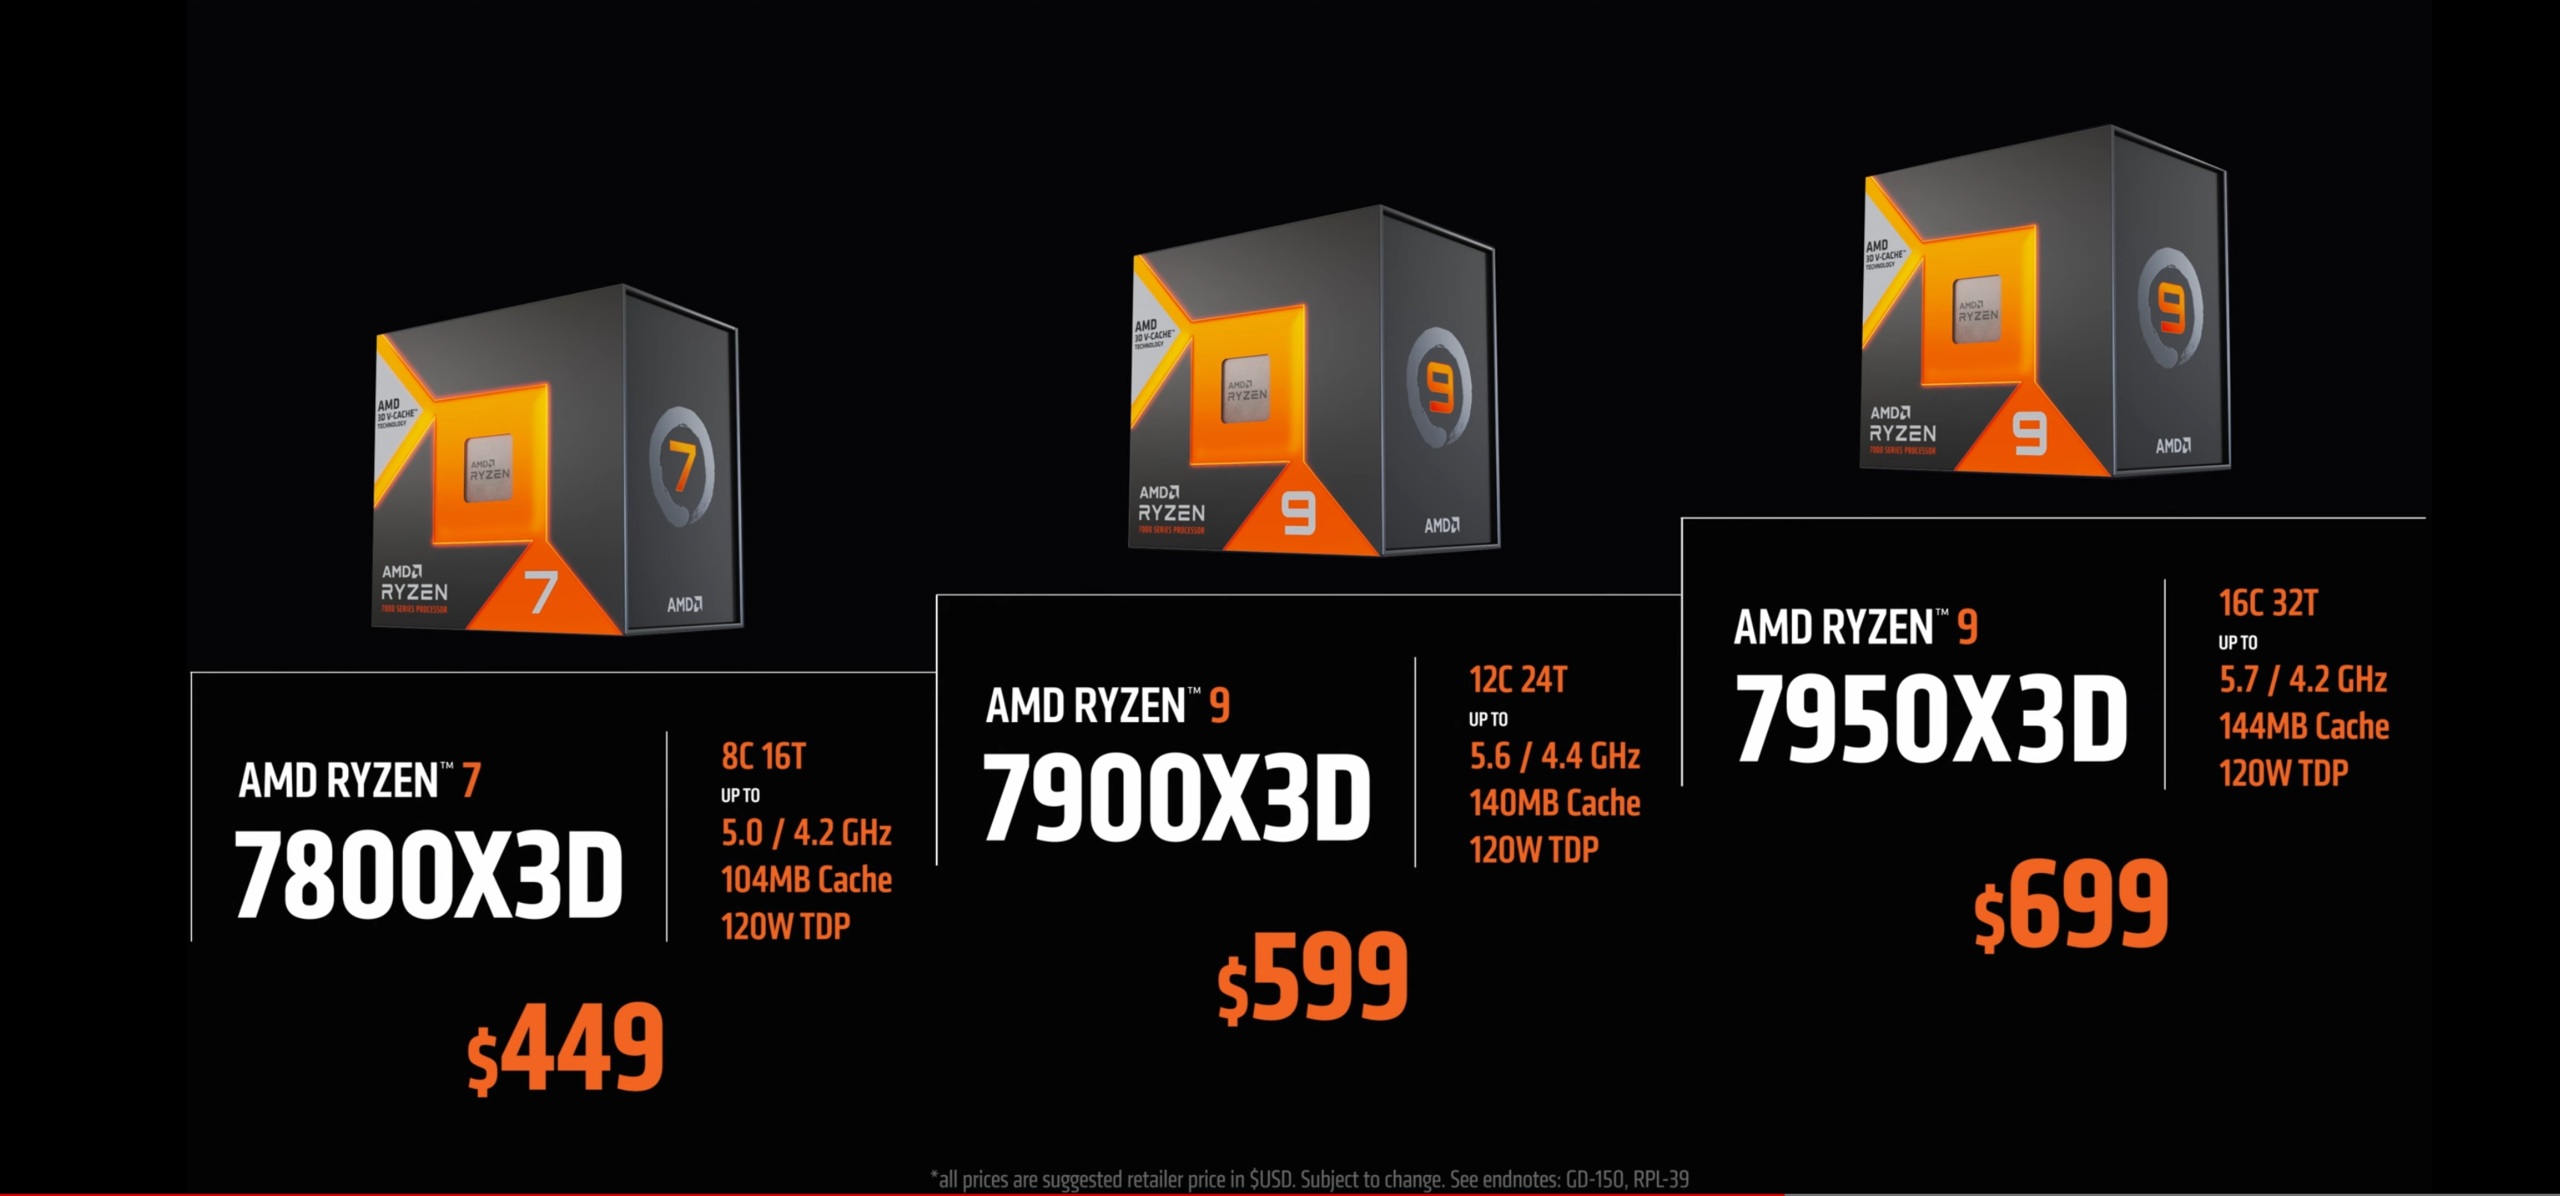 csm zen4 x3d price f8e5efac0e AMD RYZEN 9 7950X3D PROCESSOR REVIEW